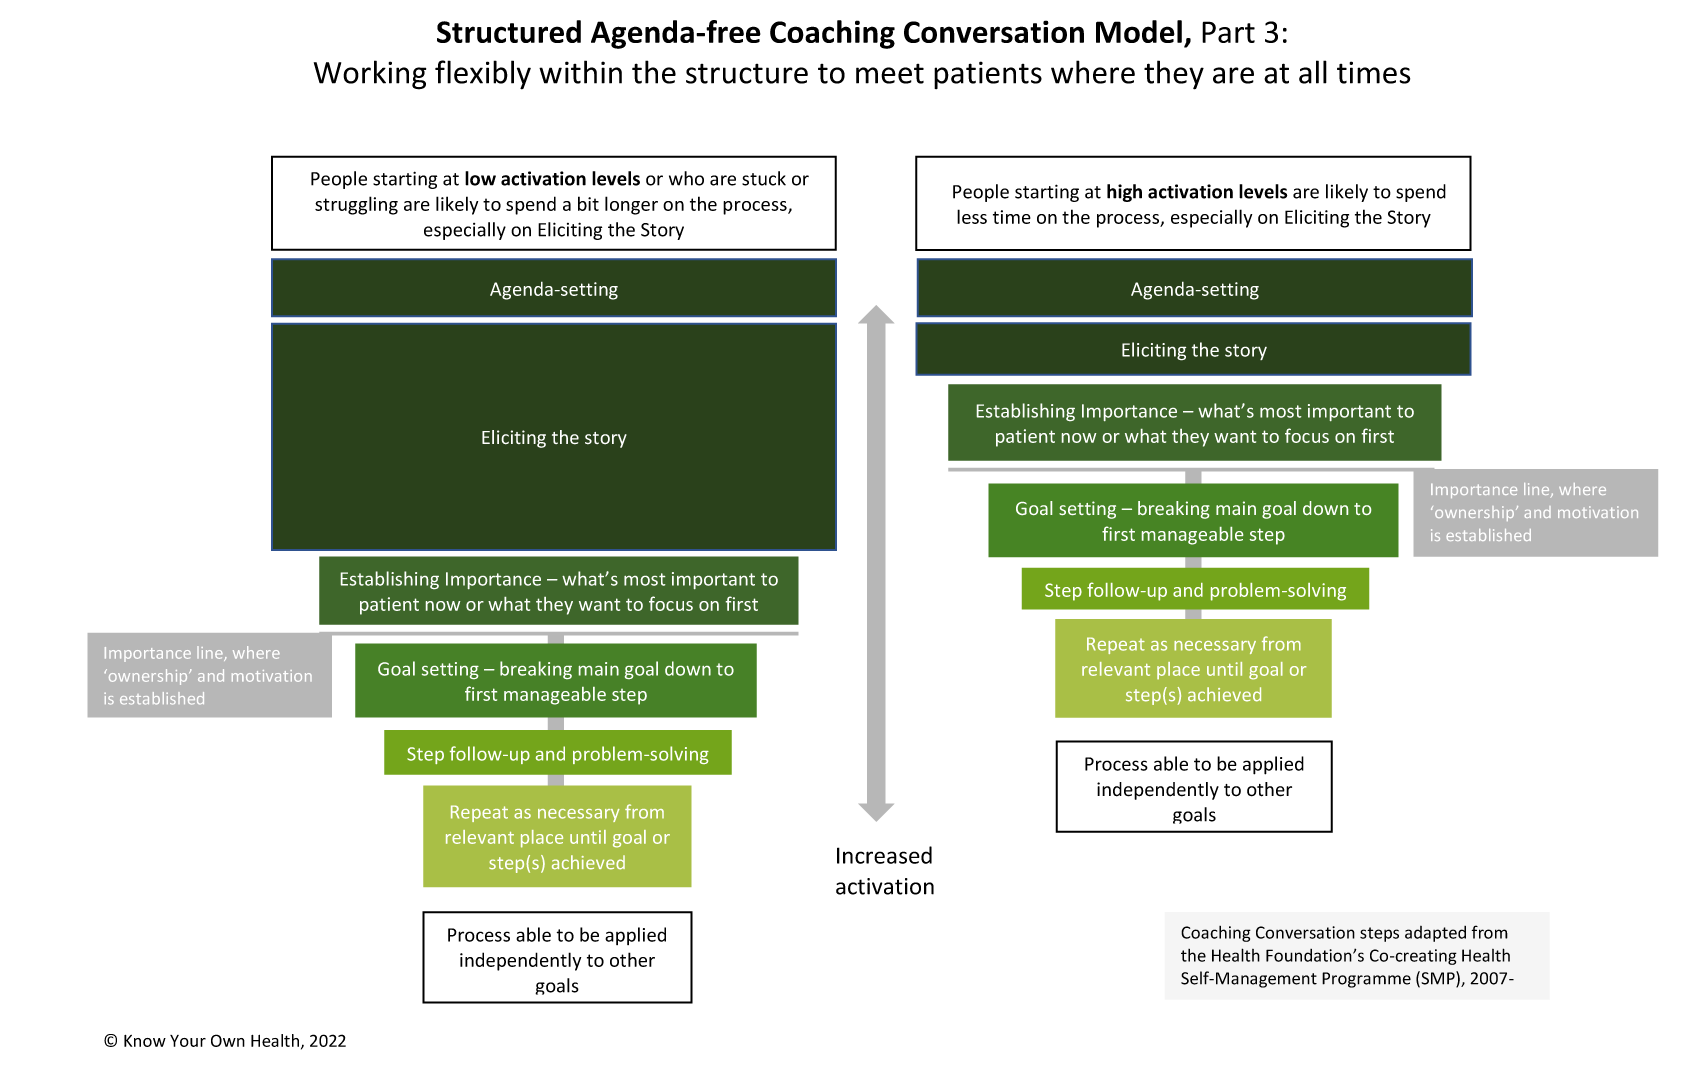 The Structured Agenda-free Coaching Conversation model: working with the structure and flexing within it to meet patients where they are